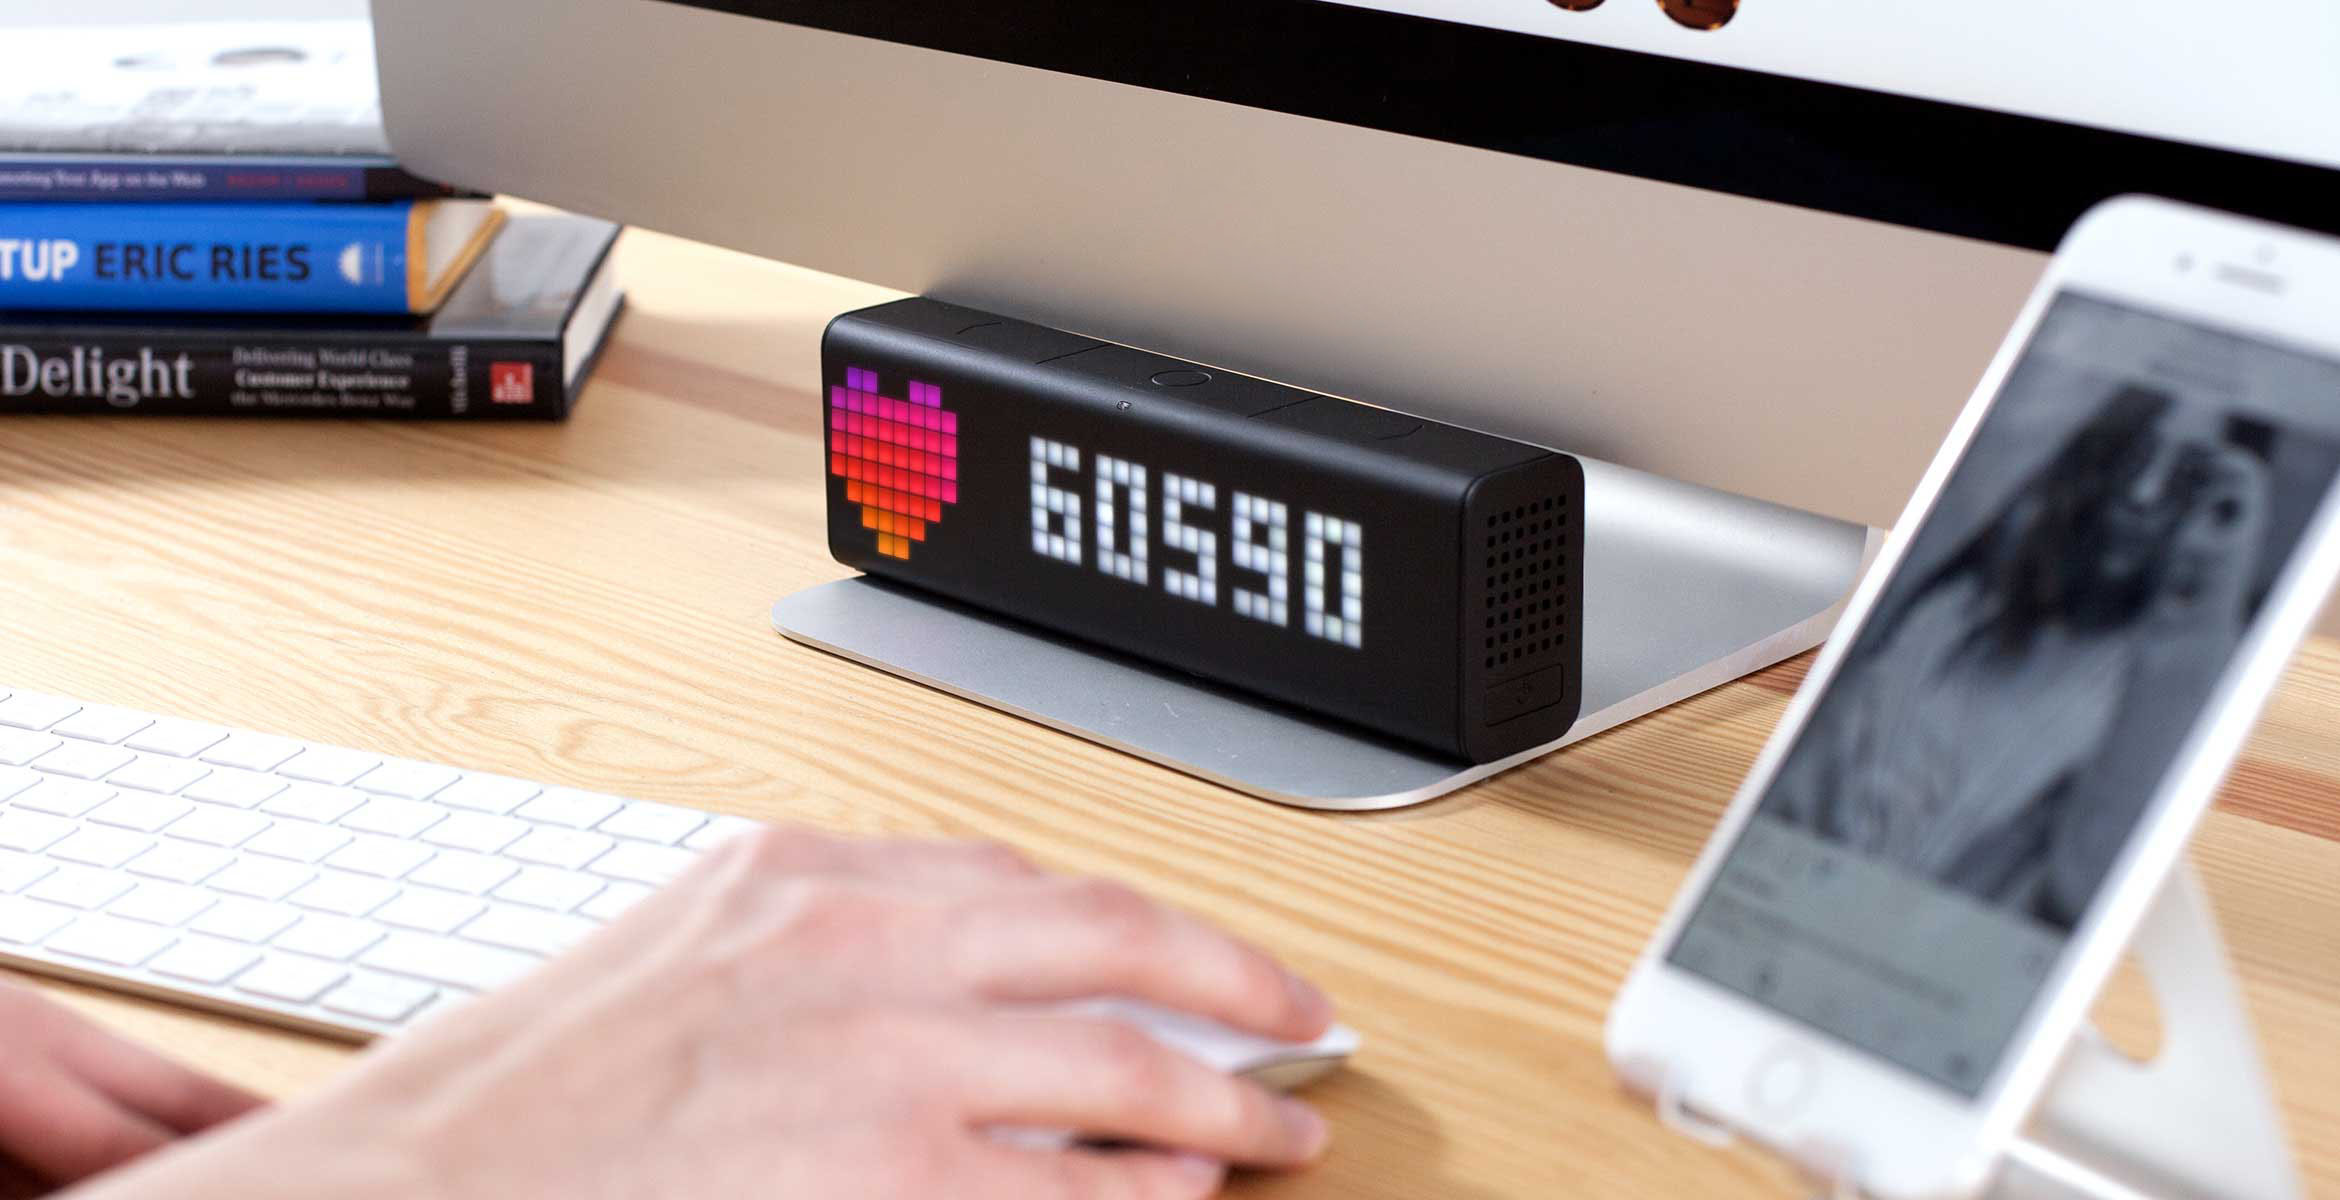 LaMetric Time smart clock complements the desk setup and displays follower count for your Instagram account